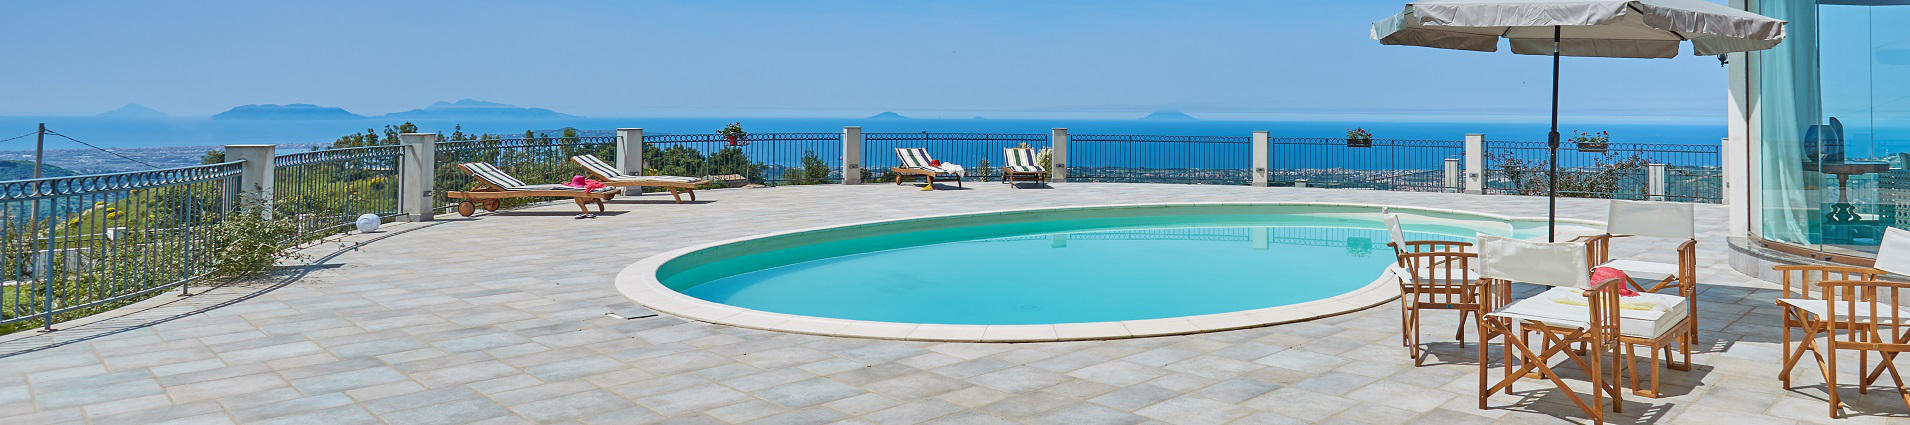 HOLIDAY RENTALS IN SICILY: OUR SELECTION OF SELF-CATERING VILLAS